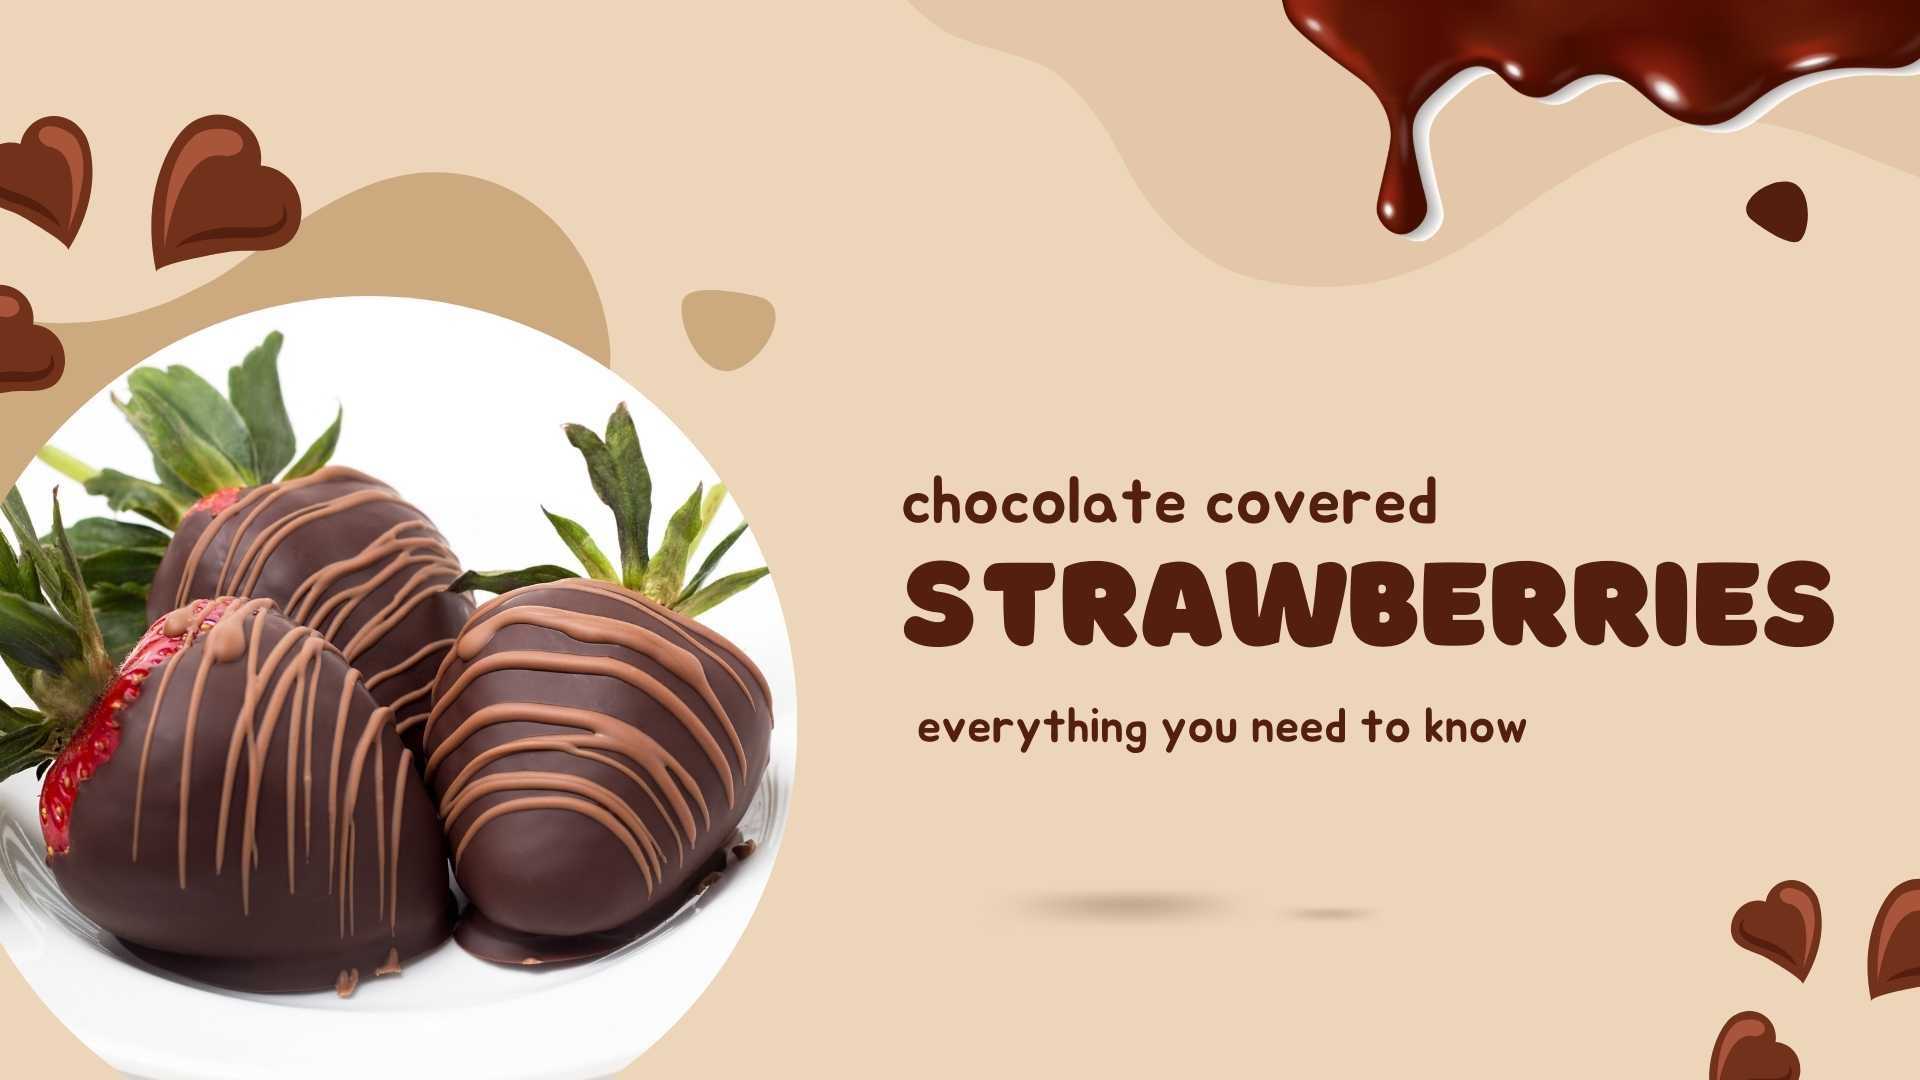 How Much Do Chocolate Covered Strawberries costs to make?